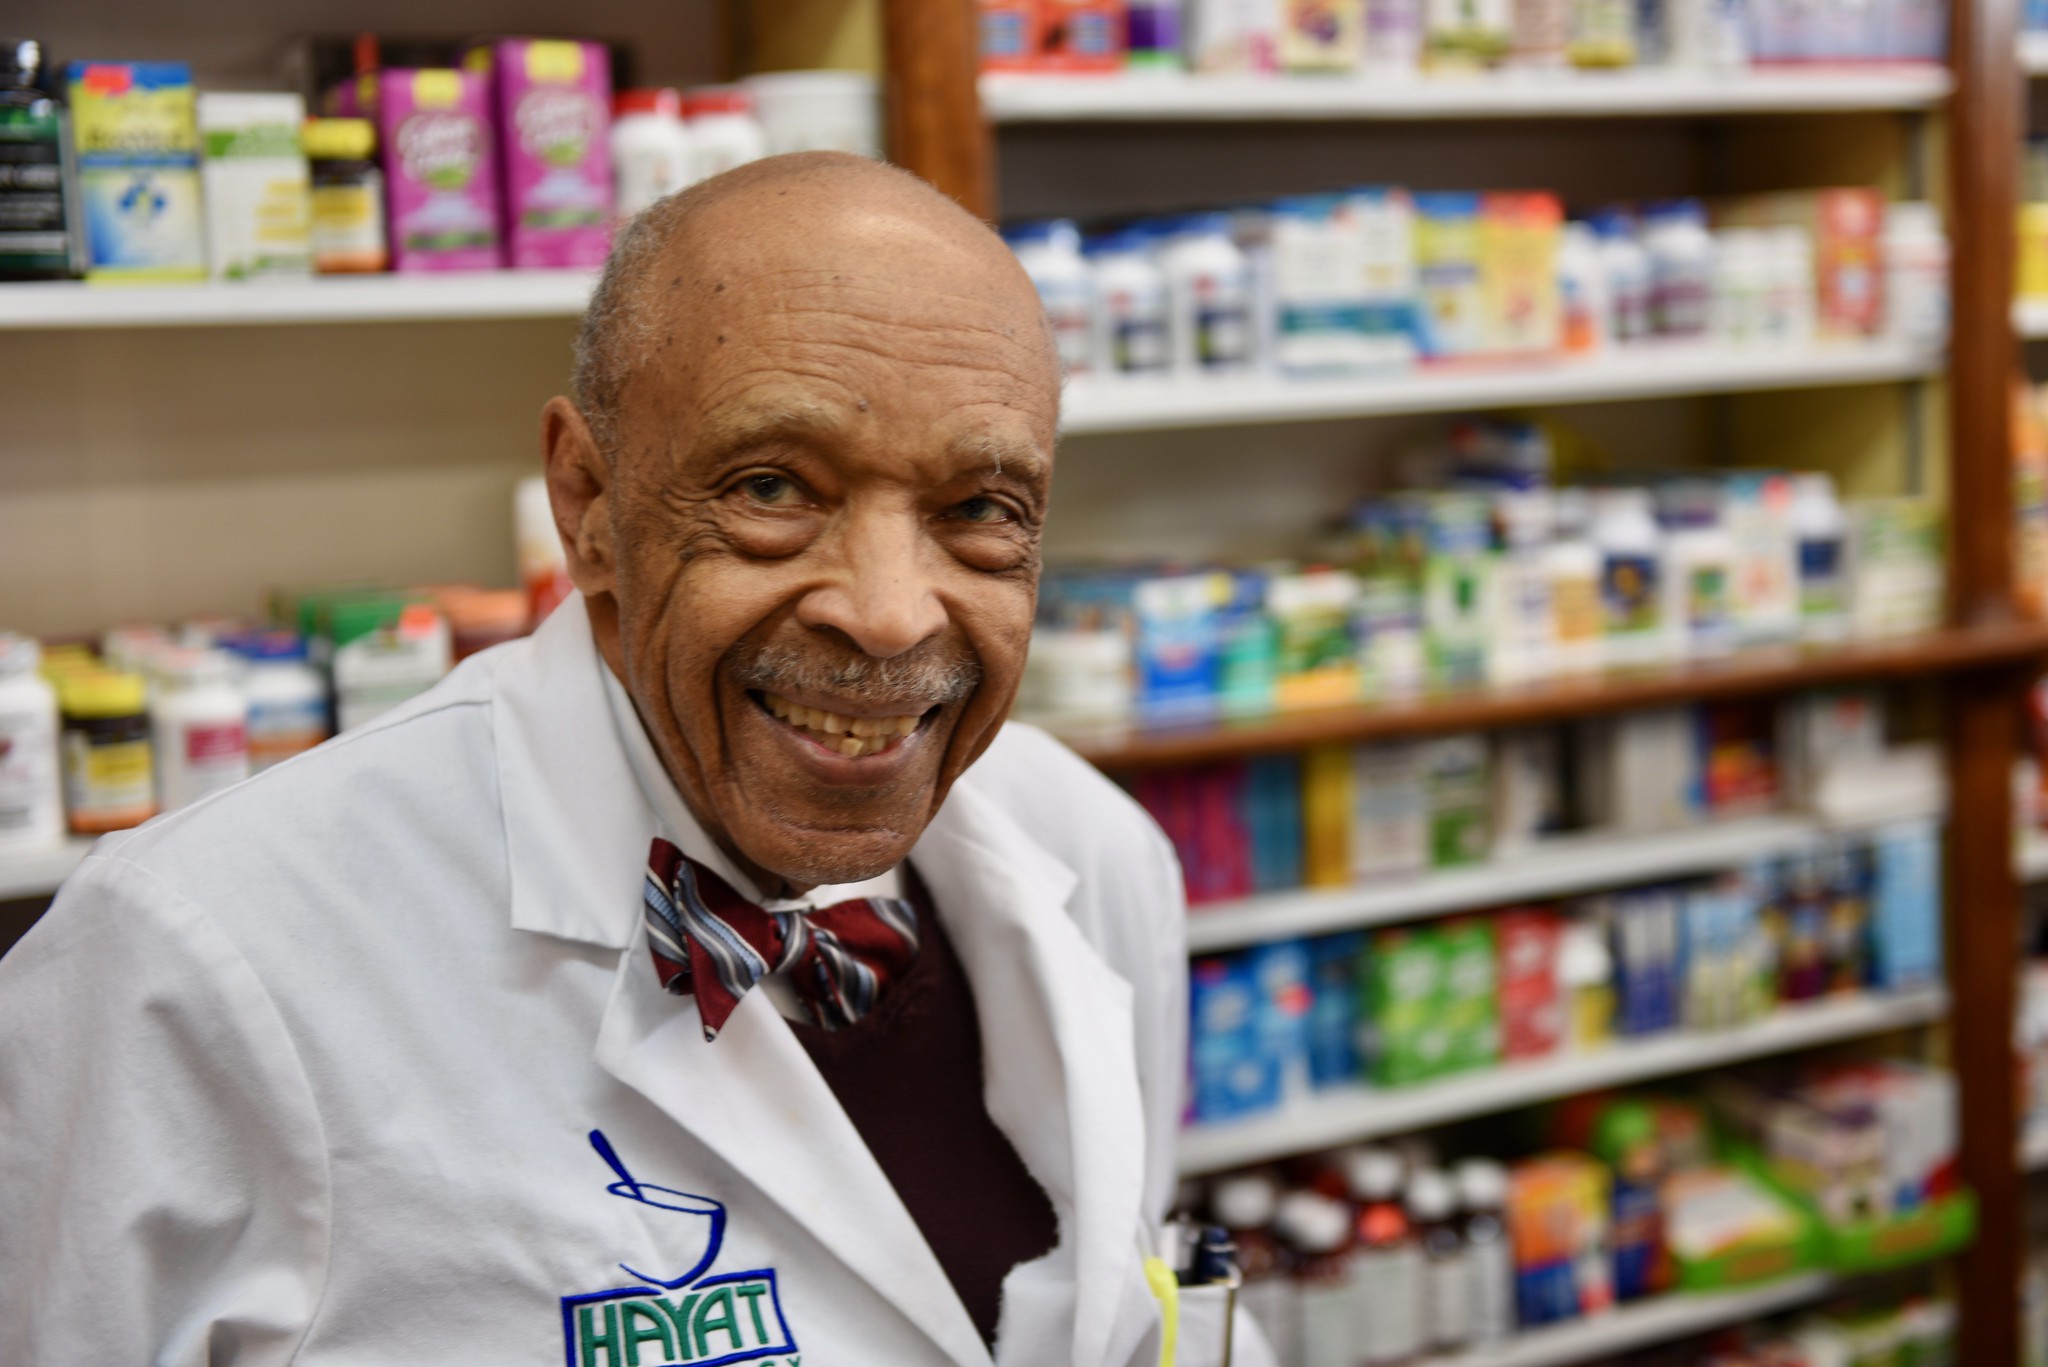 Dr. Lester Carter turns 90 next month. “I’m just the community druggist, nothing fancy,” he says. But our columnist disagrees. File photo by Sue Vliet/NNS.